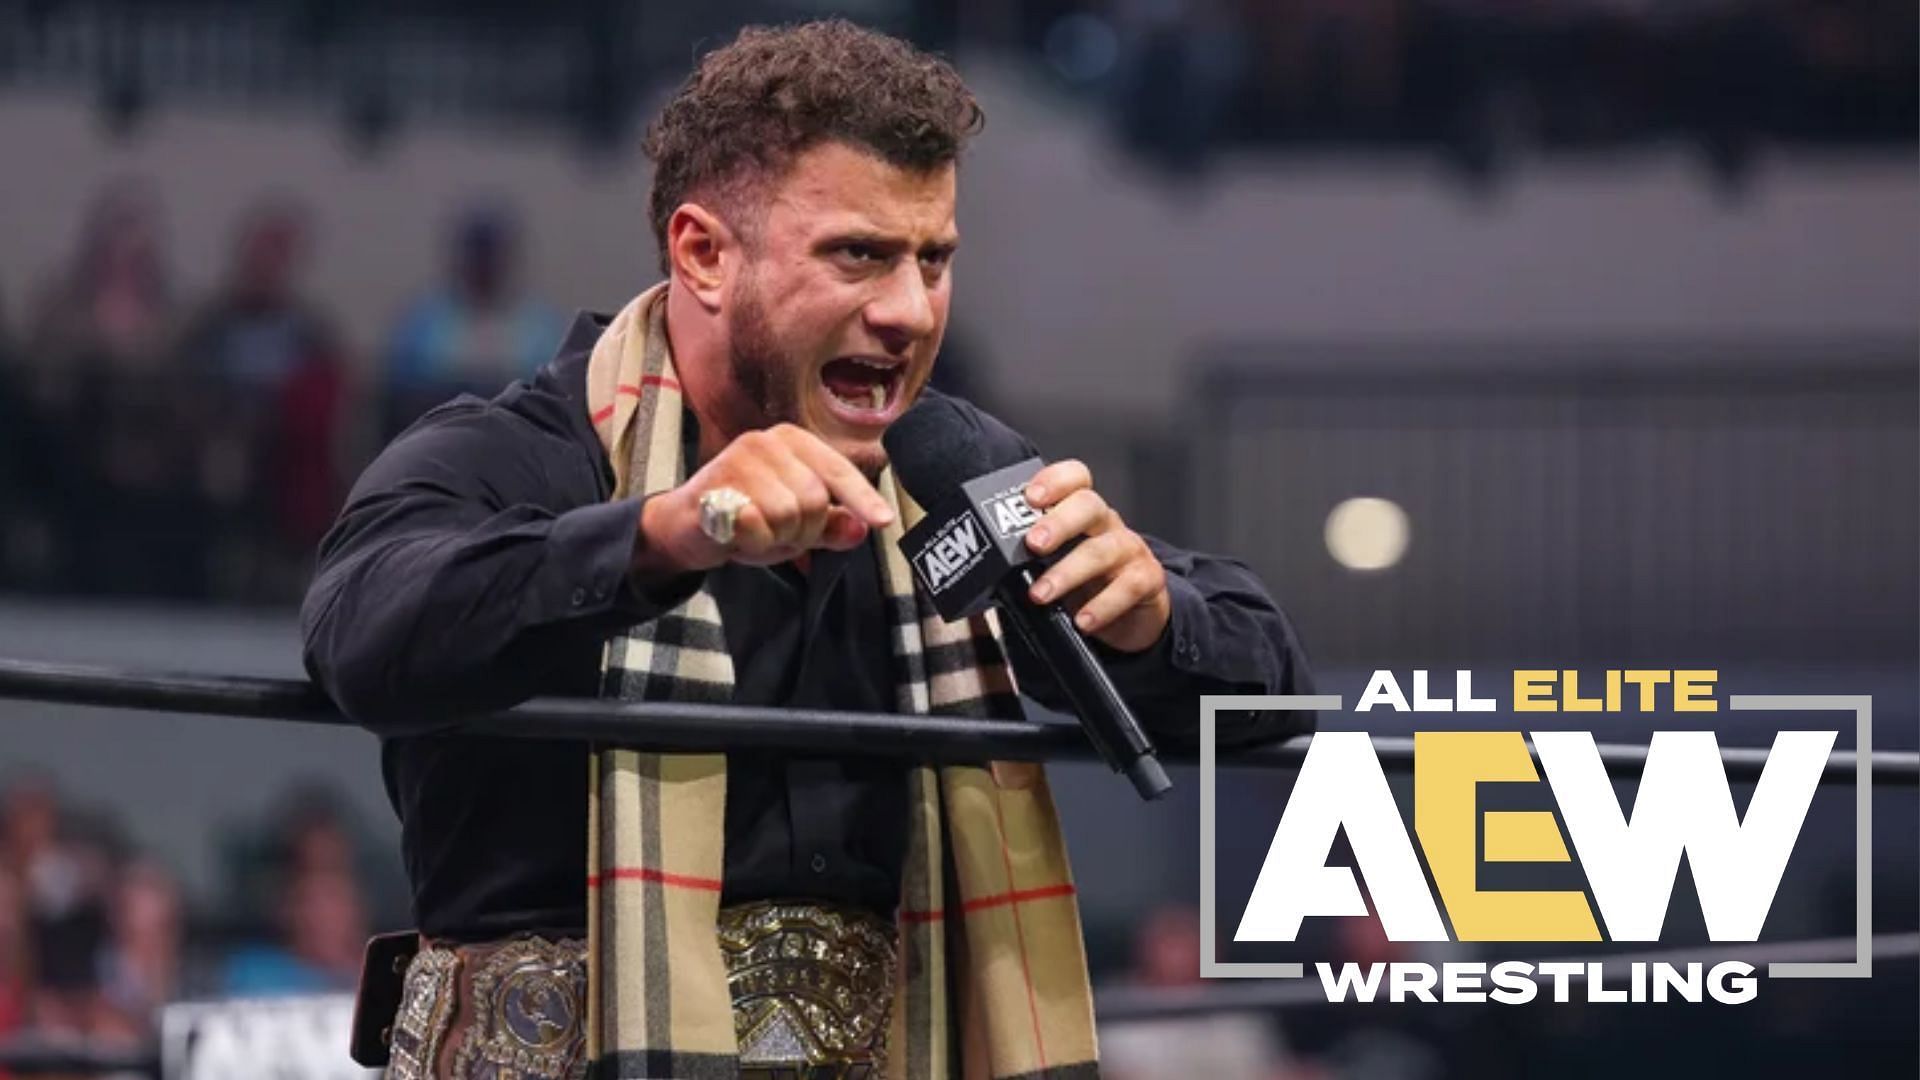 MJF responds to the question about the biggest a**hole in the AEW